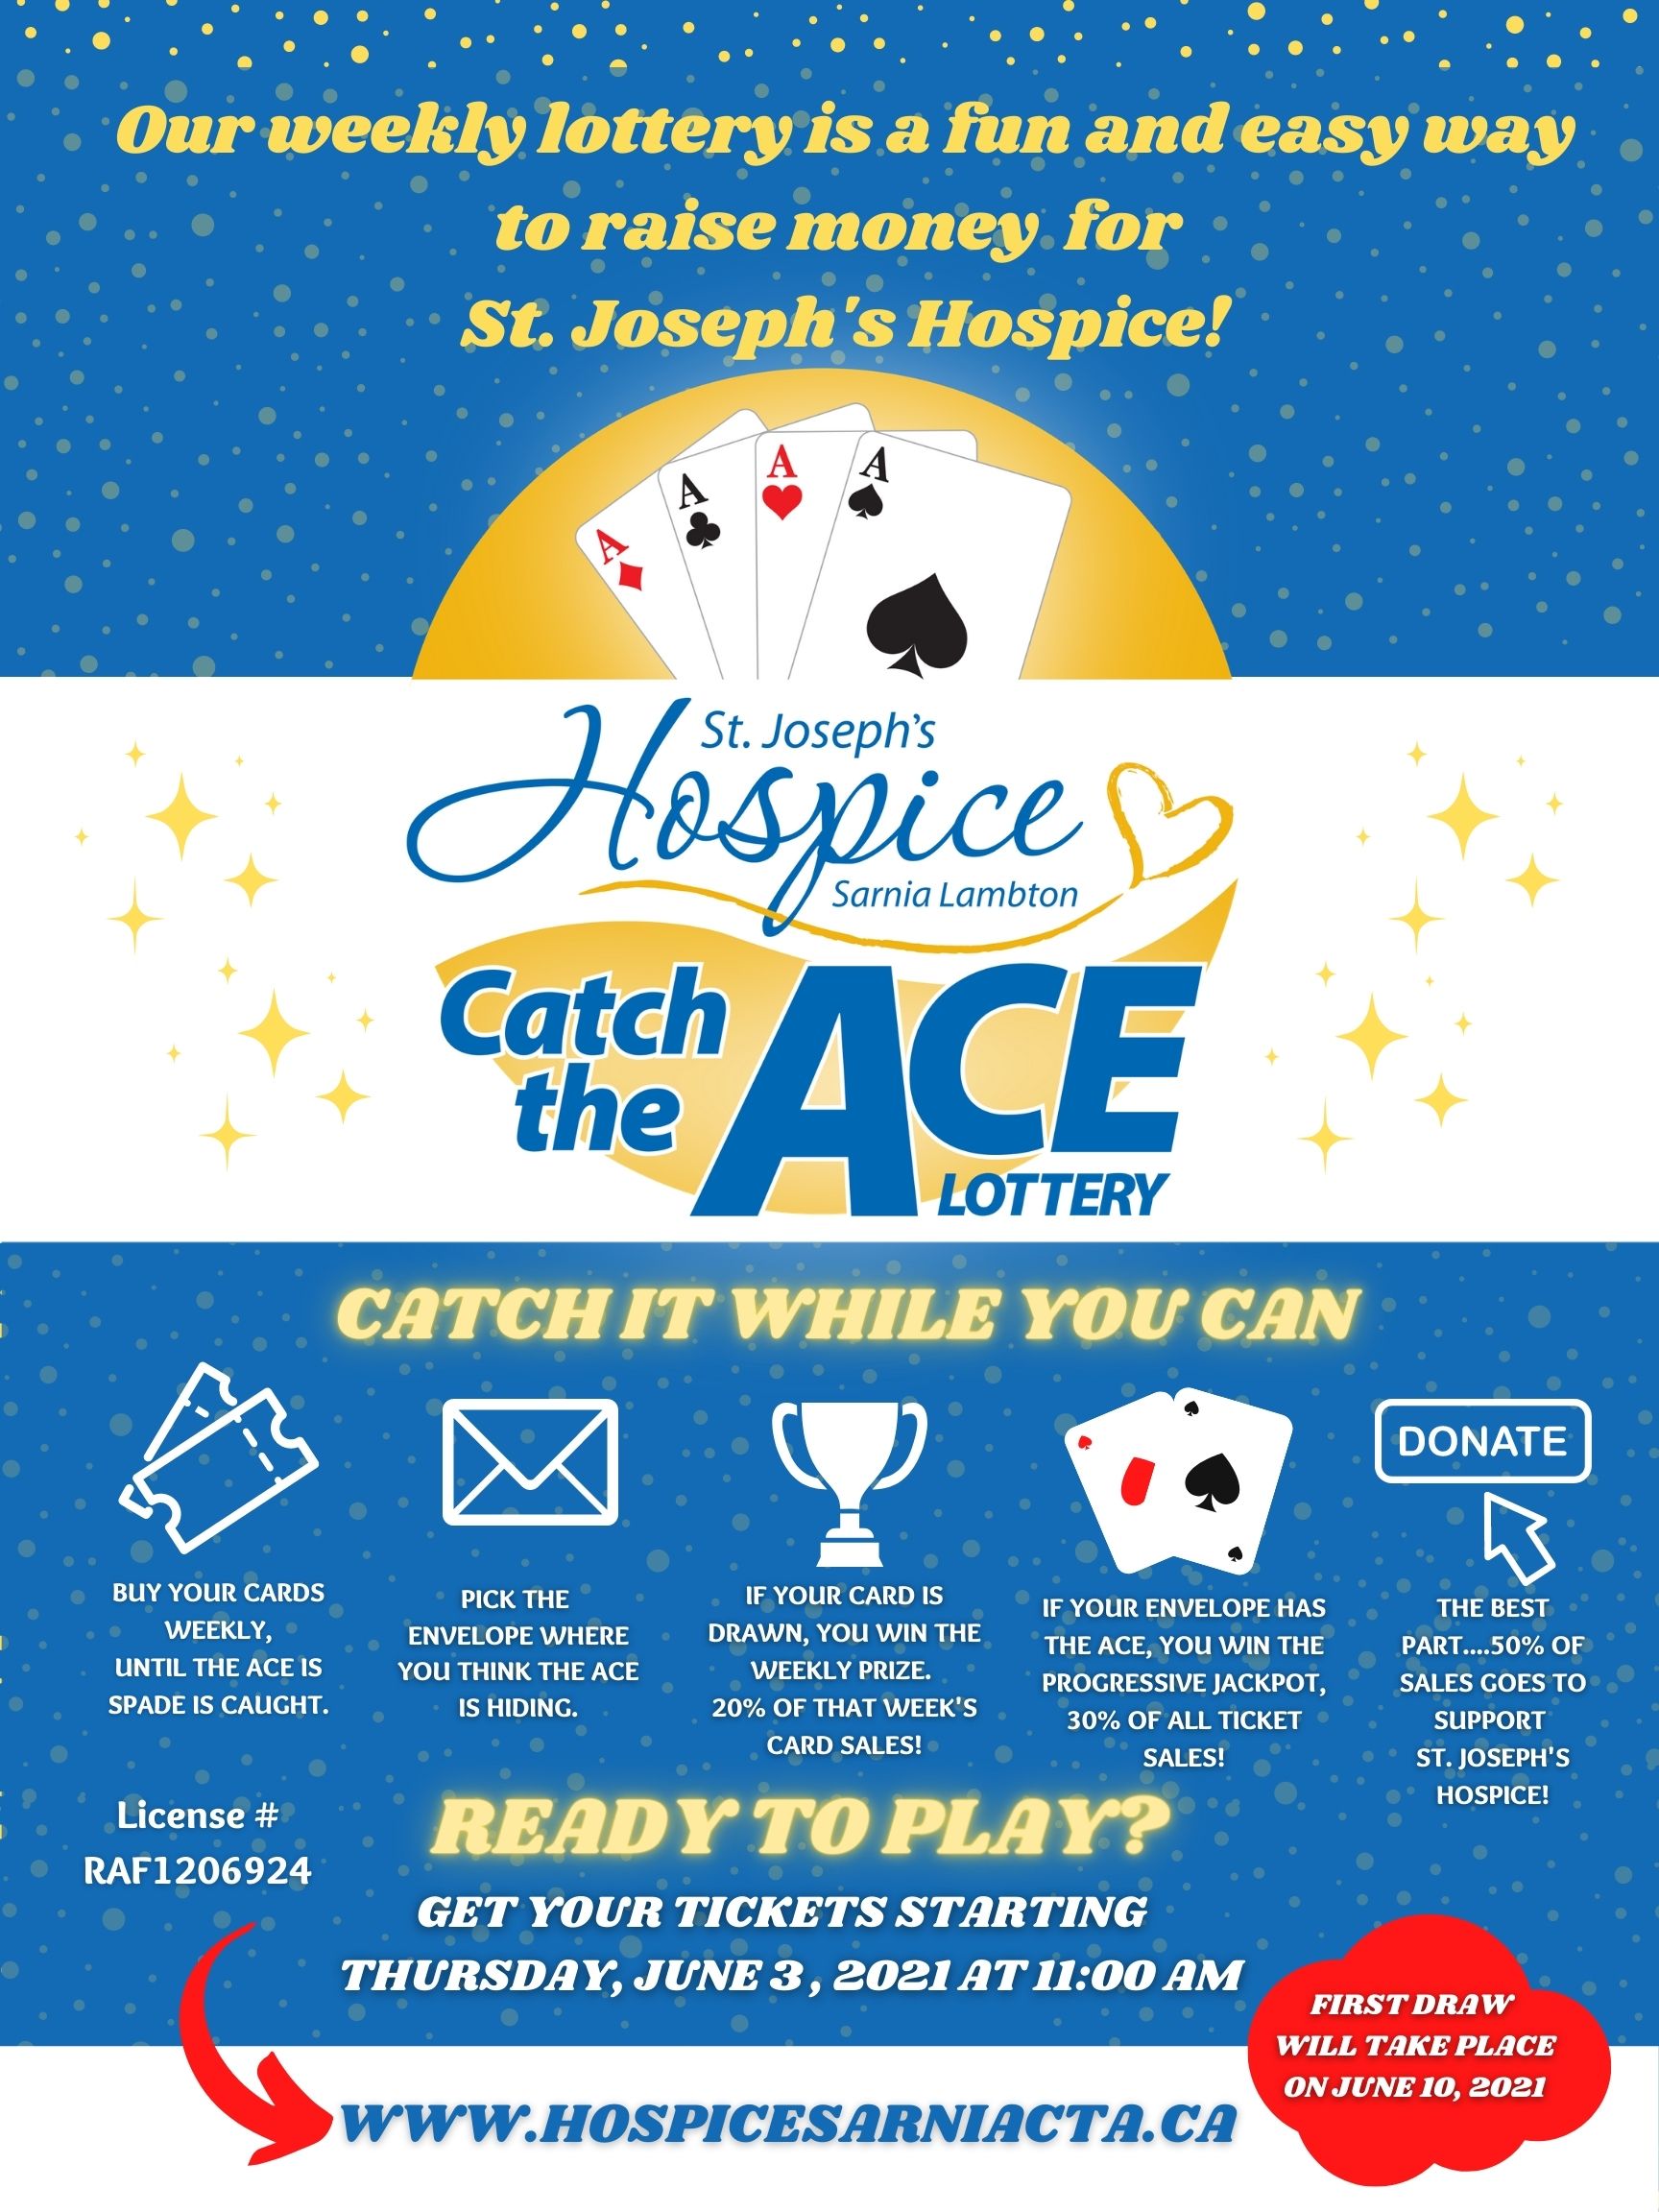 Catch the ACE